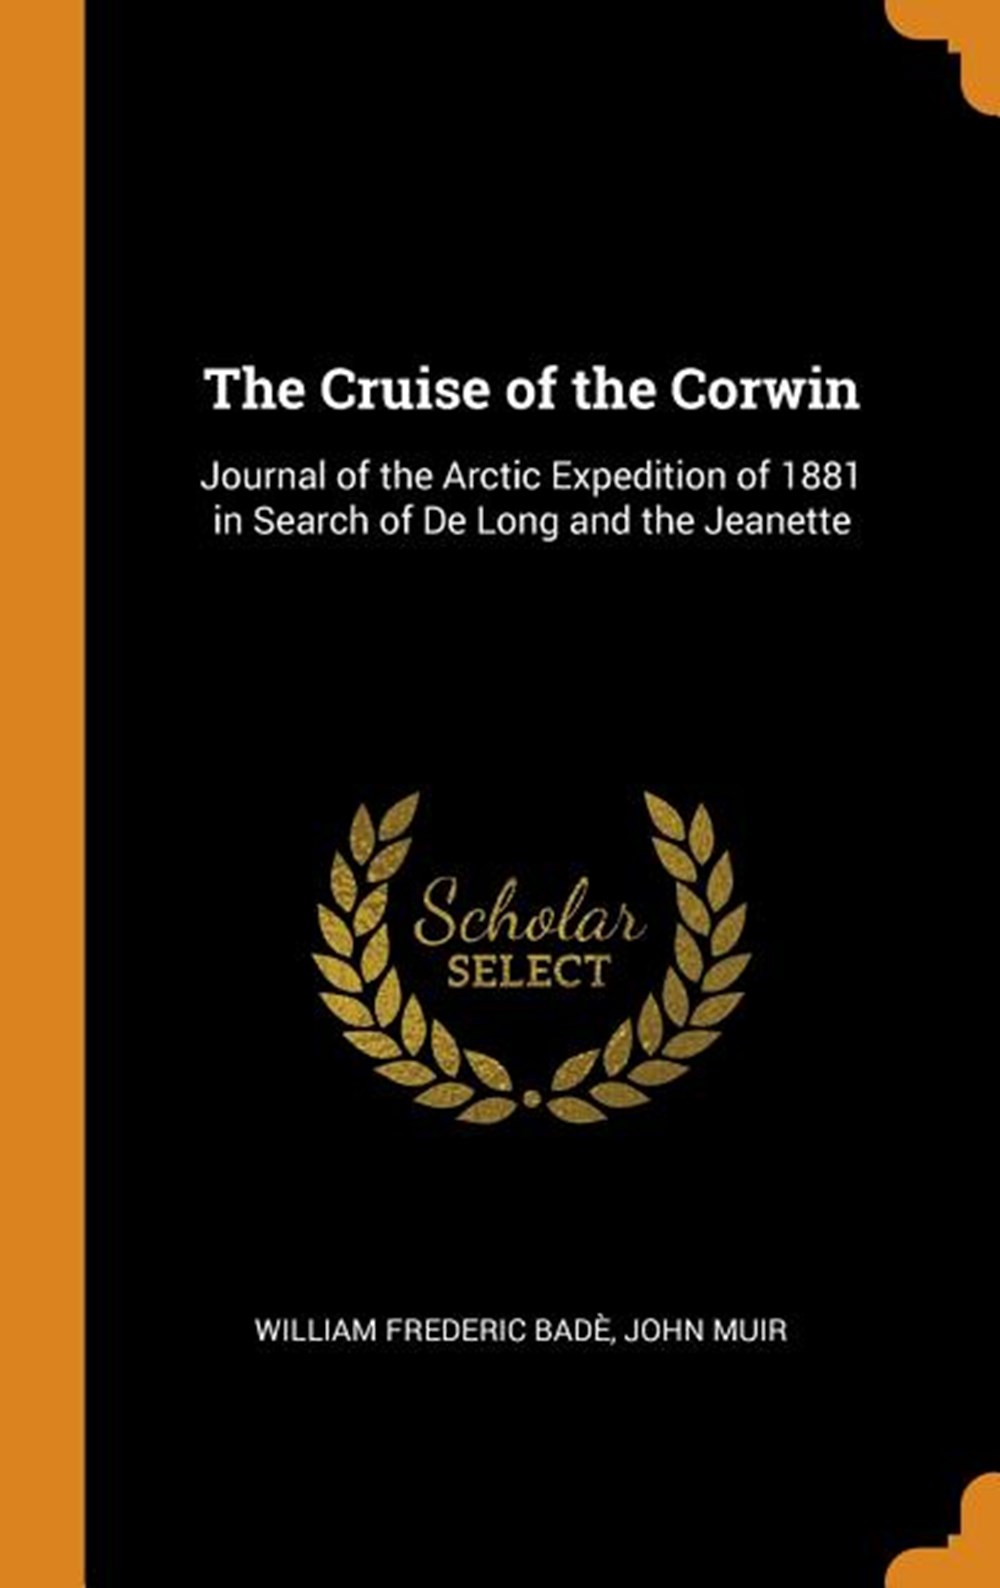 Cruise of the Corwin: Journal of the Arctic Expedition of 1881 in Search of de Long and the Jeanette